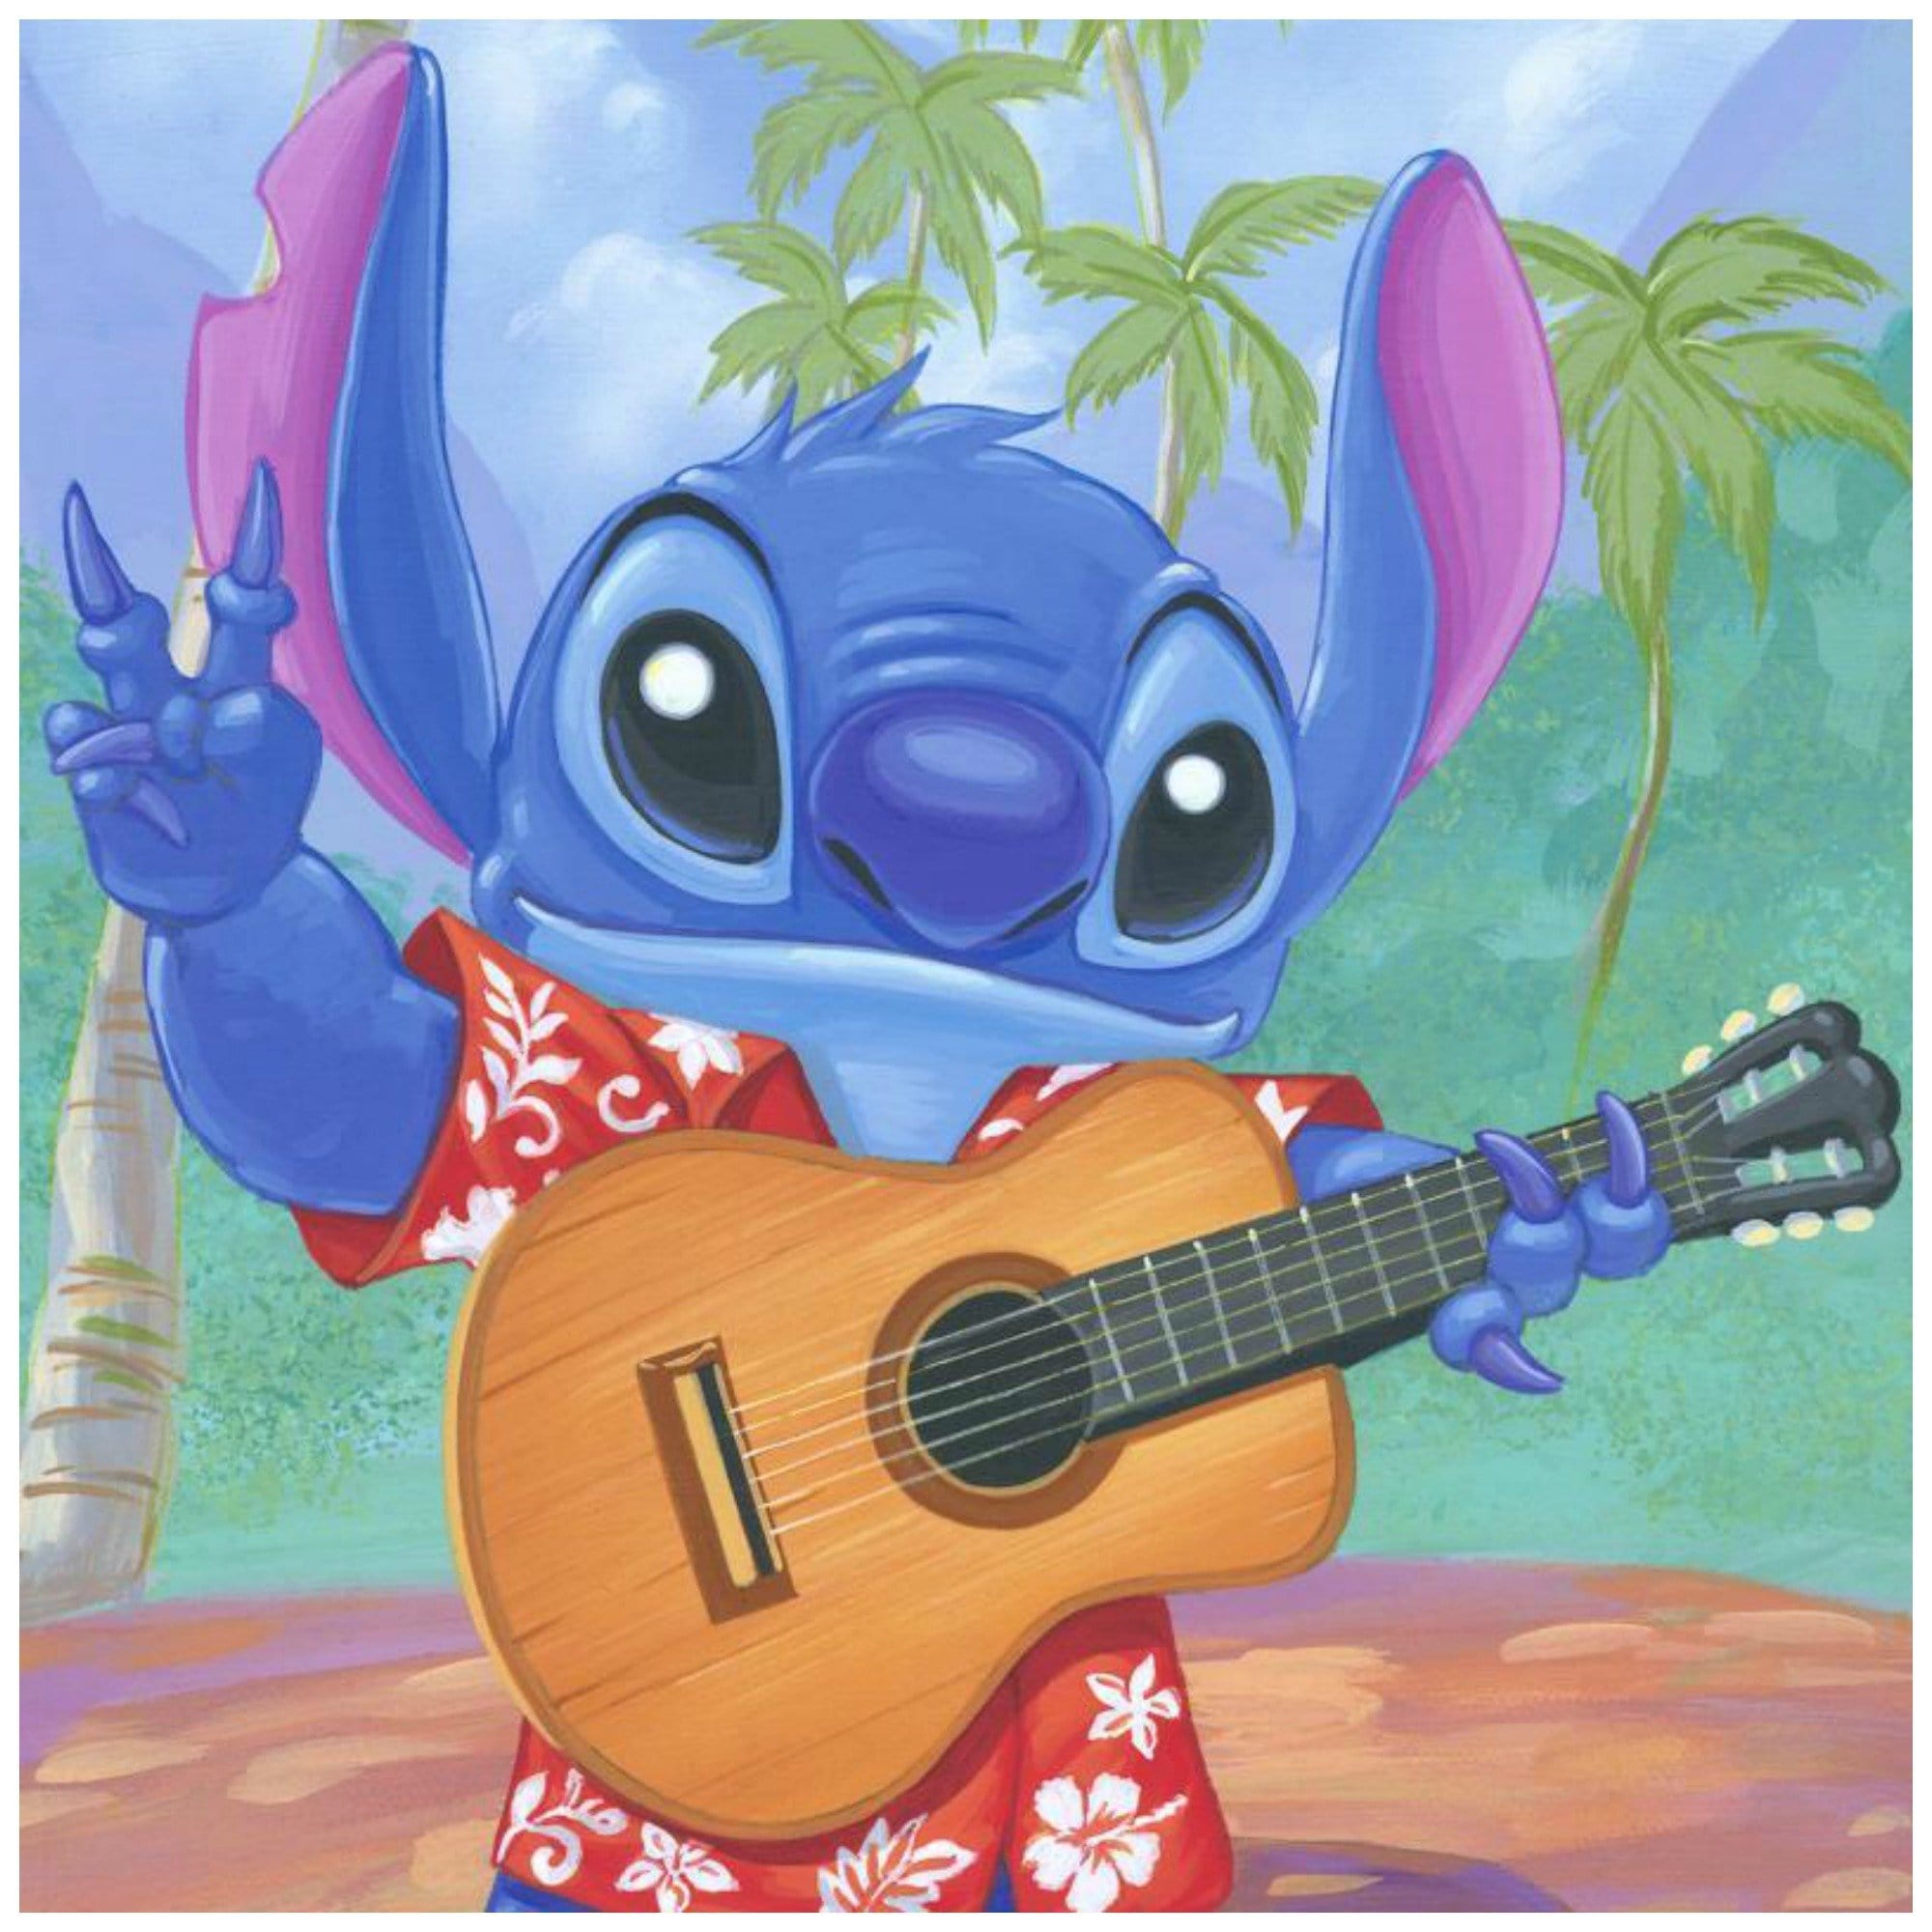 Warm Aloha by Manuel Hernandez.  Stitch sports a red floral hawaiian shirt with a guitar in hand - closeup